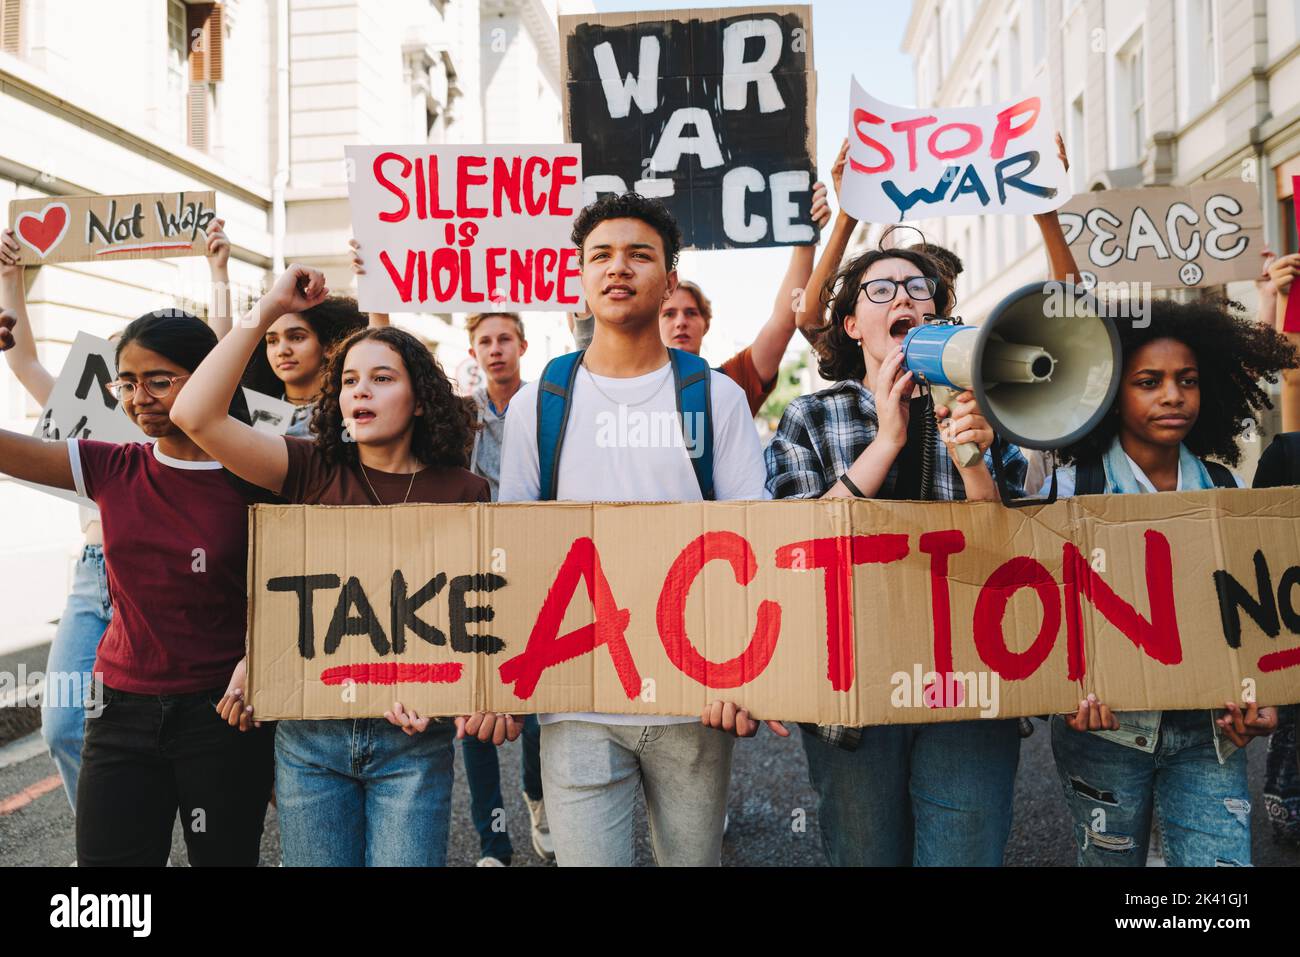 Activism for peace and human rights. Group of multicultural peace activists marching the streets with posters and banners. Diverse young people protes Stock Photo